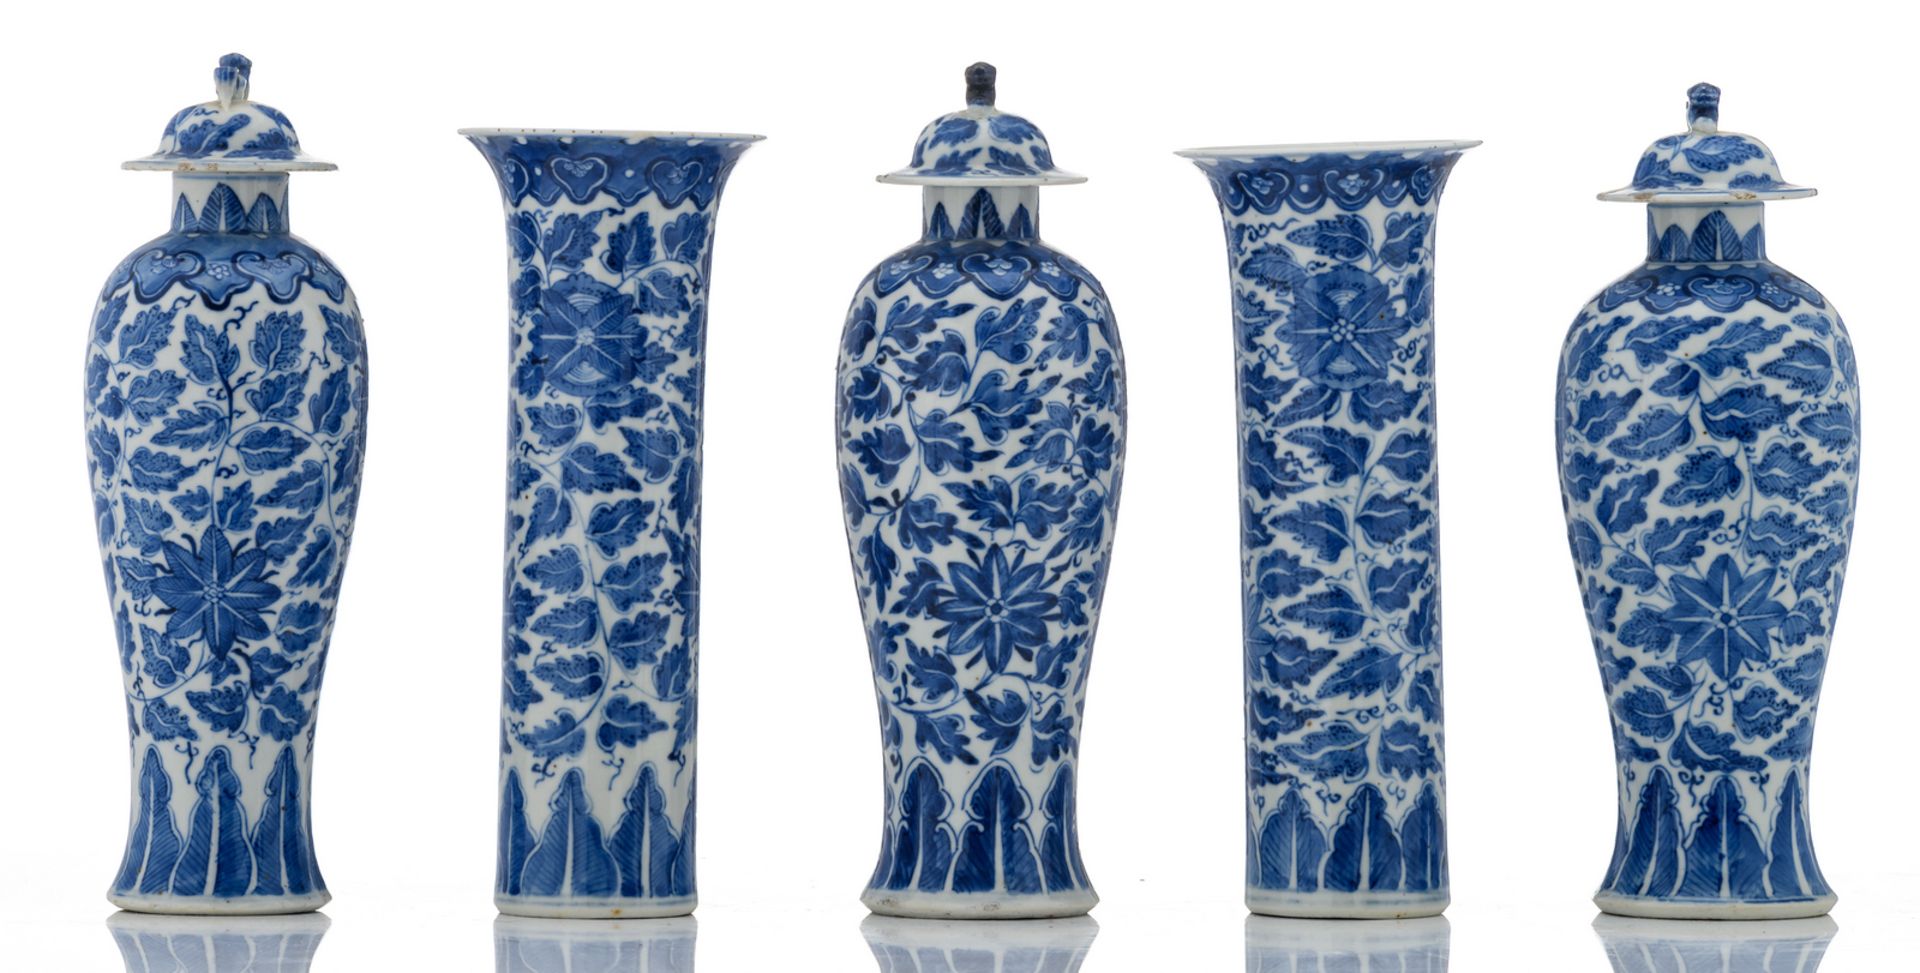 A five-piece Chinese blue and white floral decorated garniture with a Xuande mark, H 25,5 - 28,5 cm - Bild 4 aus 6